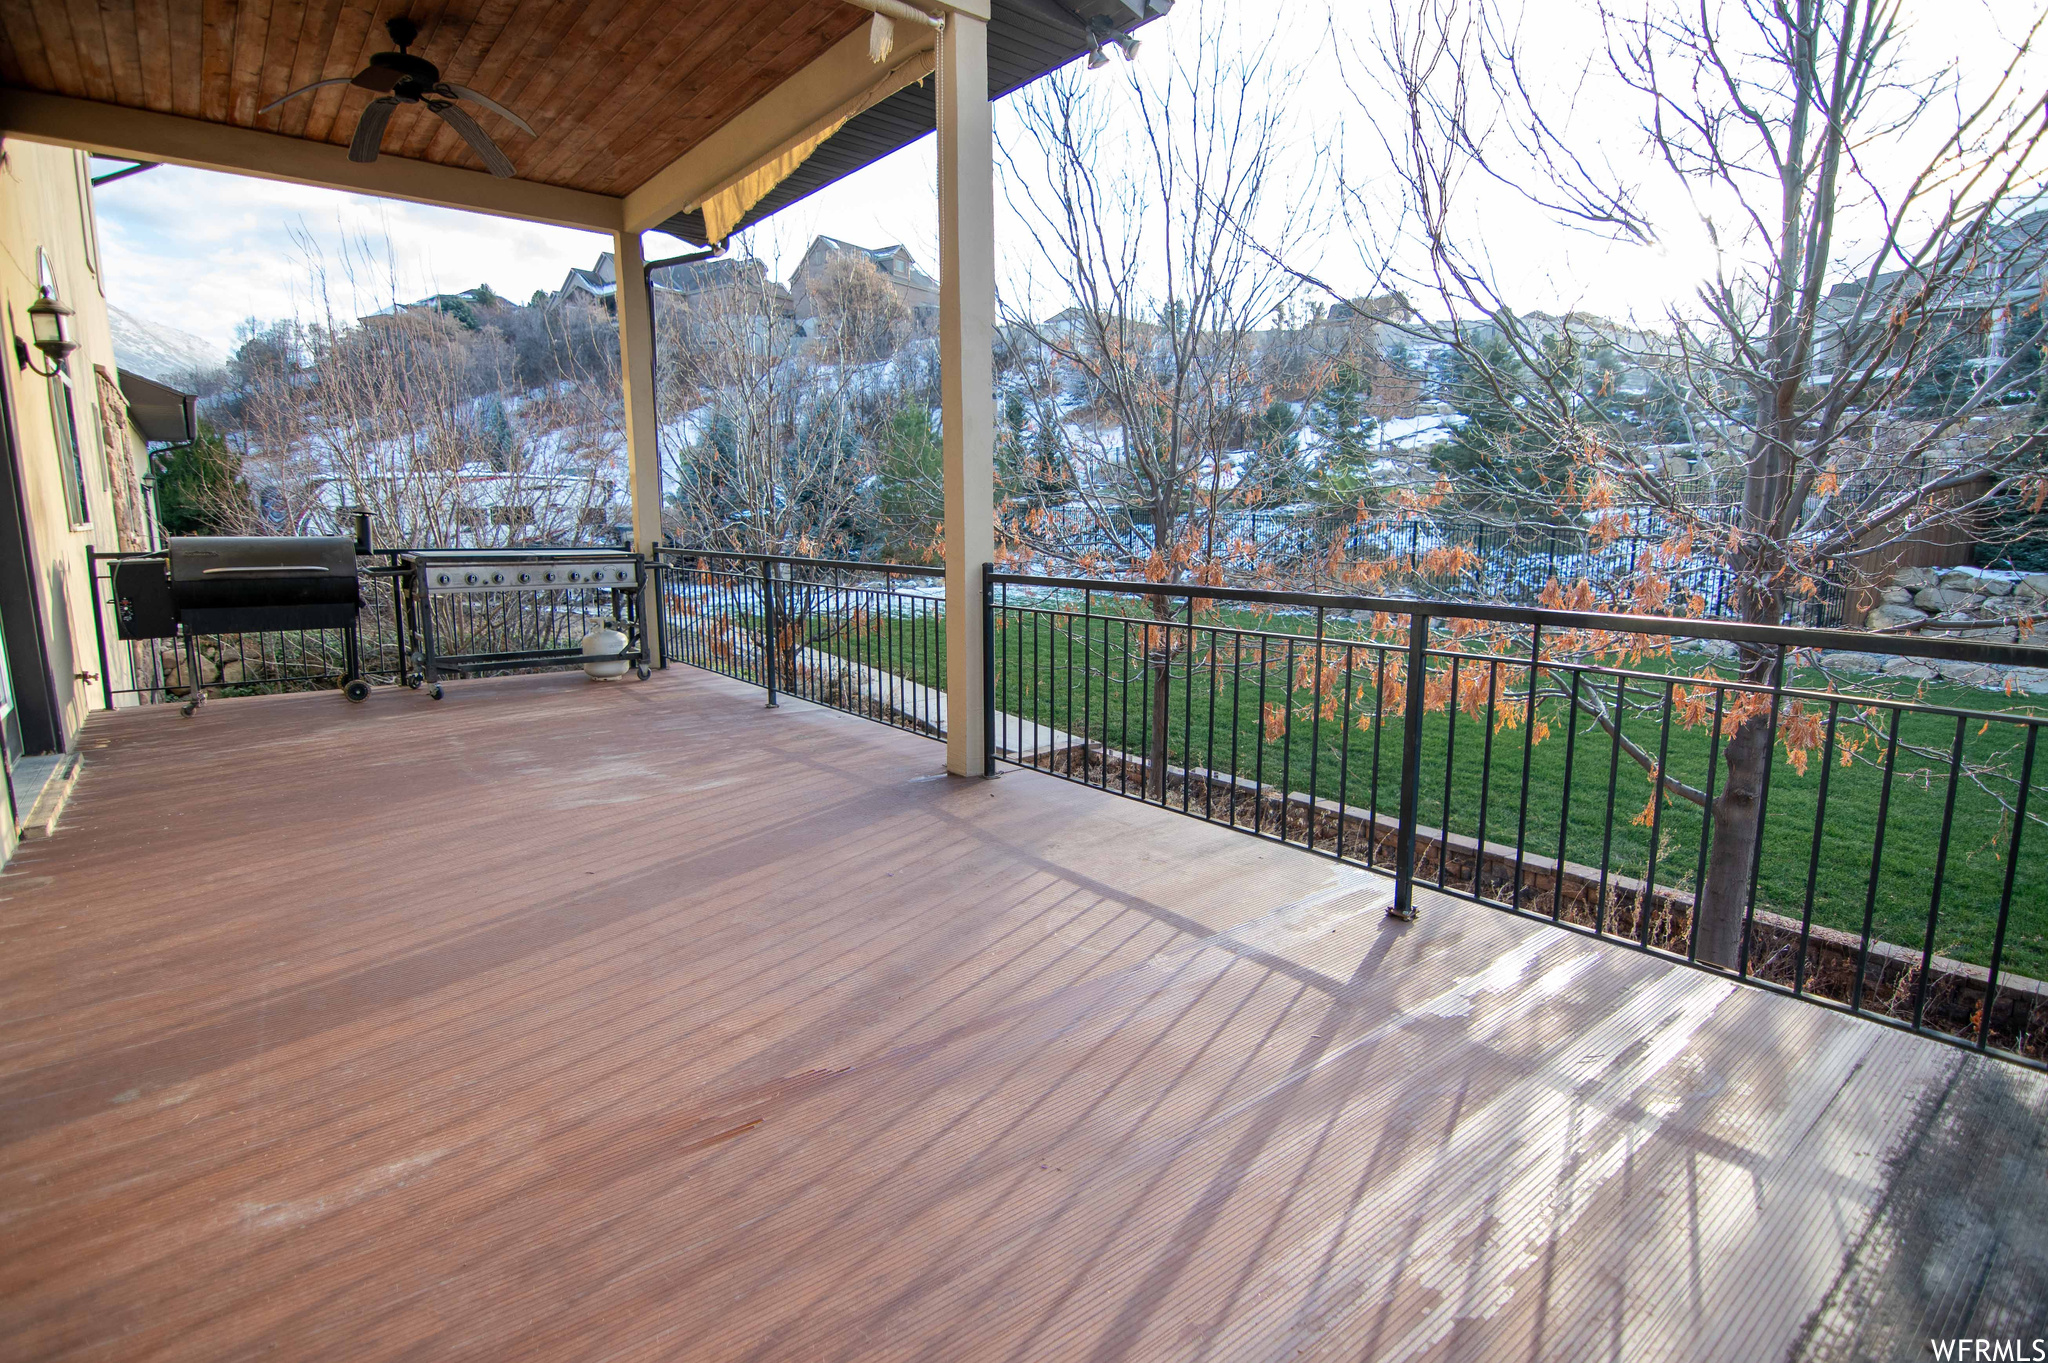 Wooden deck with ceiling fan, a yard, and a mountain view